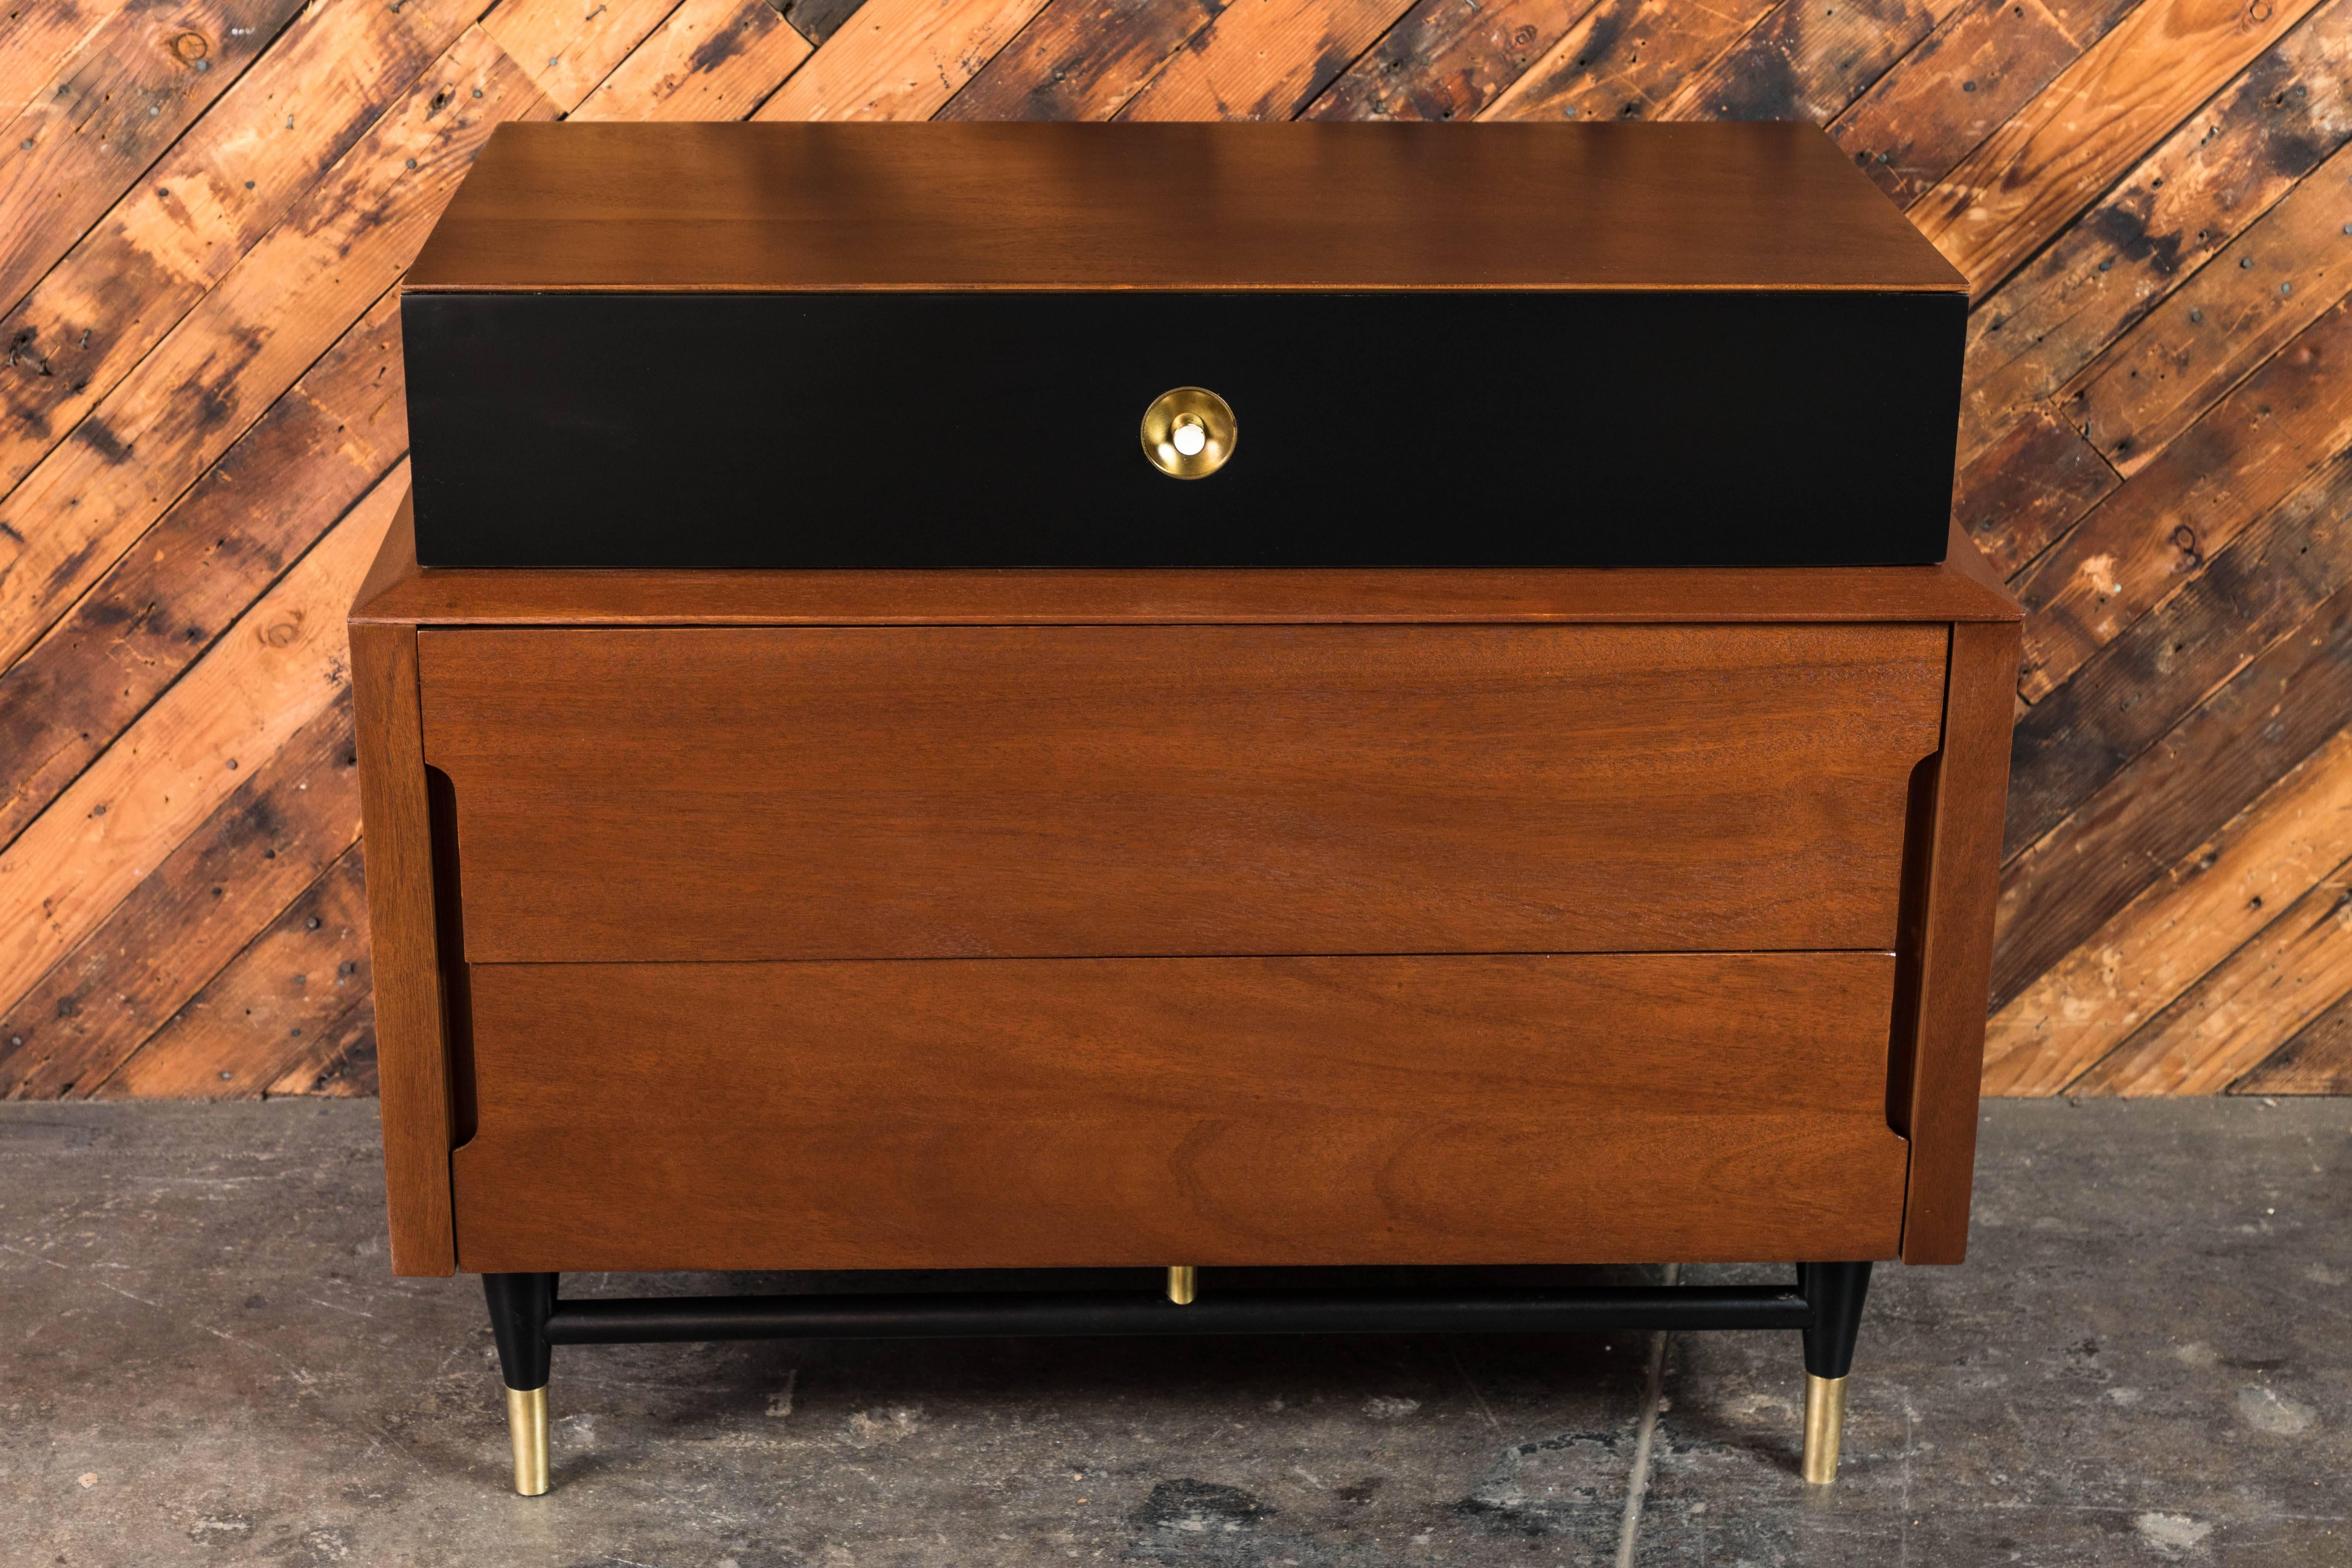 Fabulous pair of midcentury refinished walnut and lacquered small dressers with polished brass details. Can be used as oversized nightstands or compact but spacious two-drawer dressers.